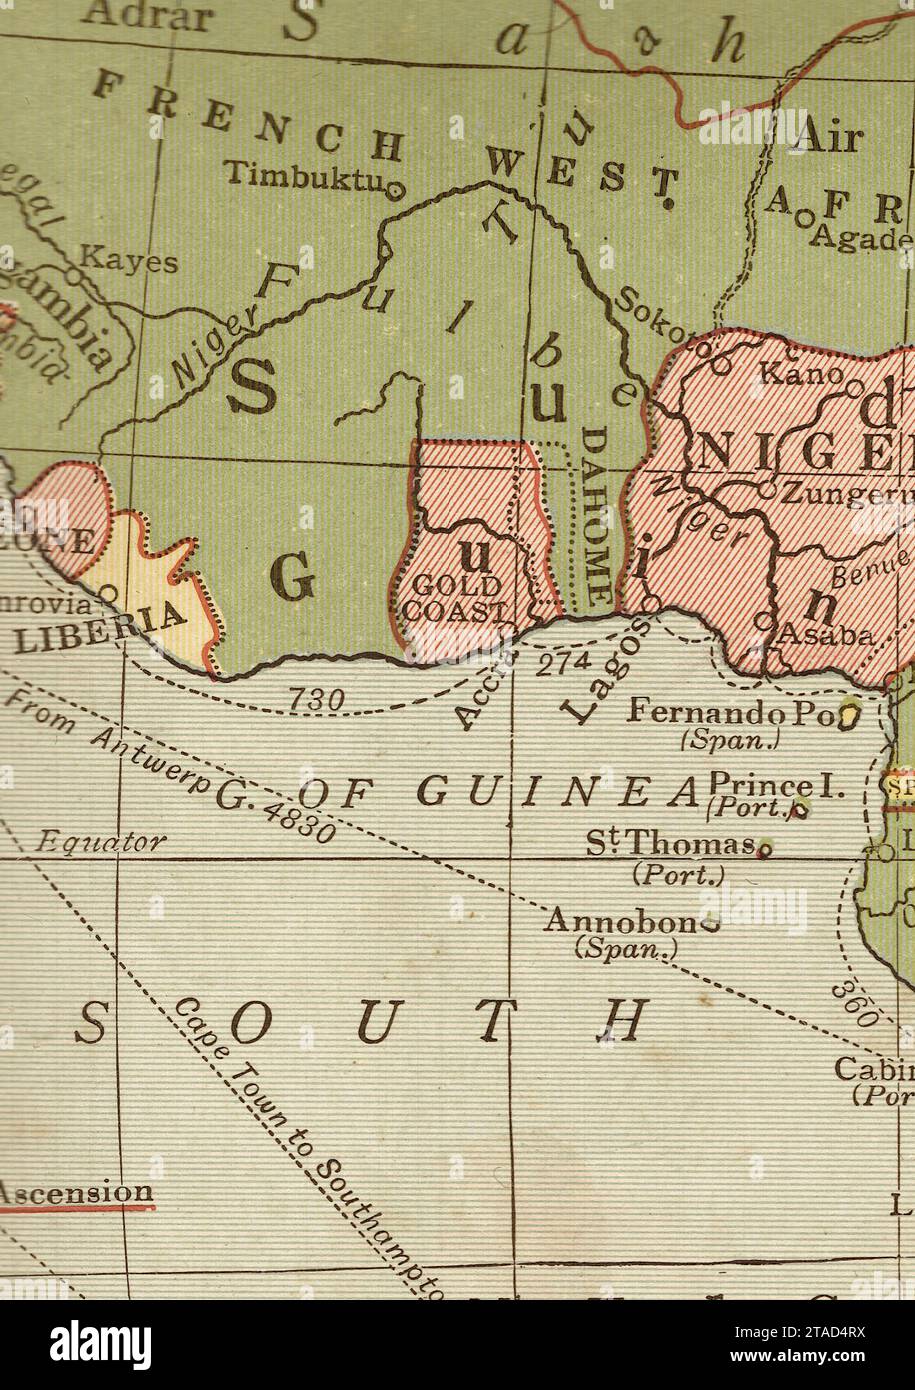 A vintage/antique political map of Gold Coast and Liberia, Africa in sepia. Stock Photo